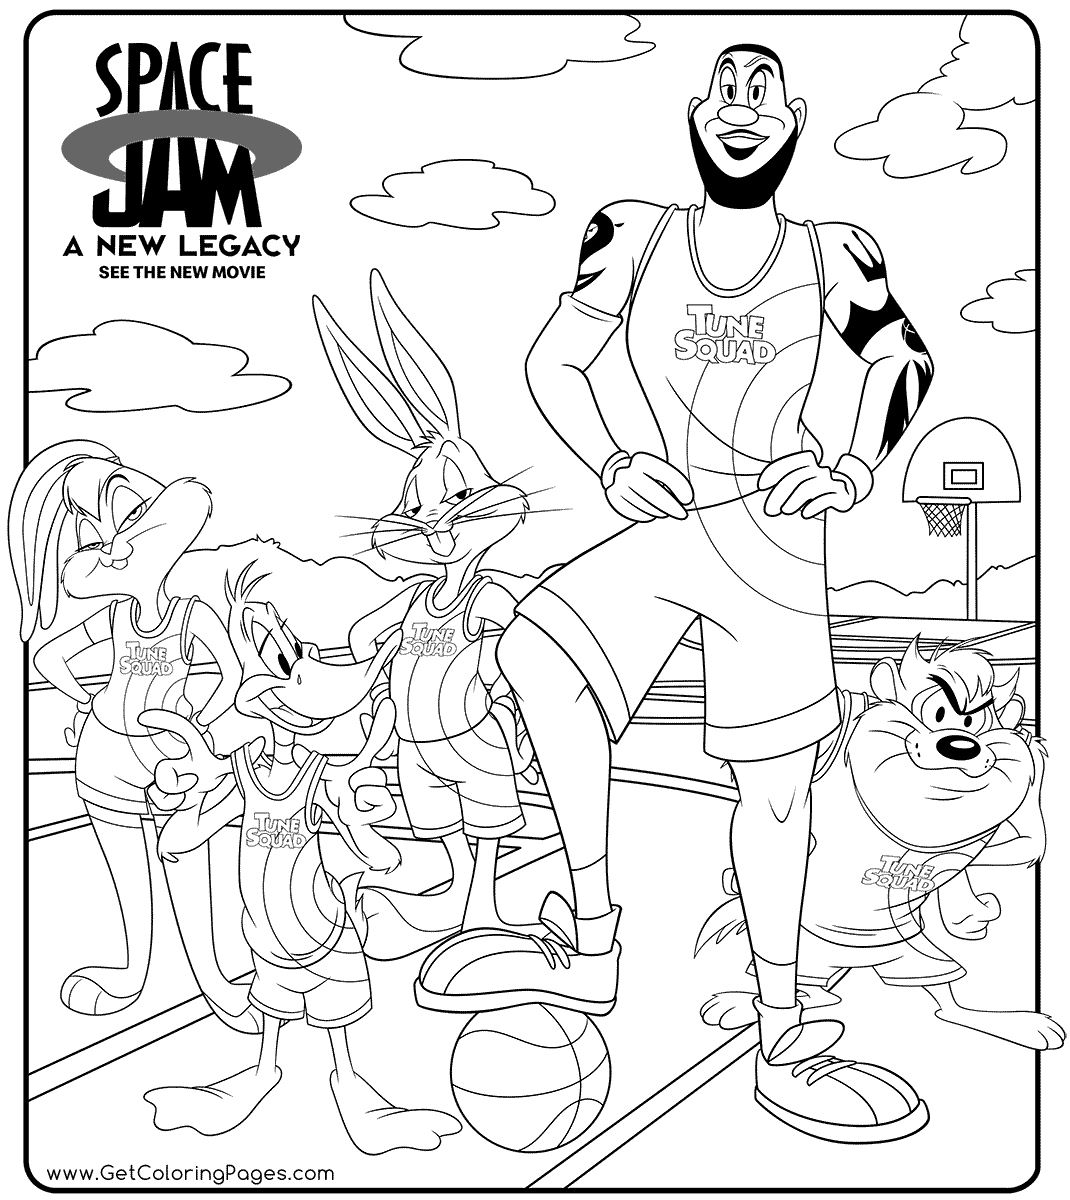 Space Jam 2 Coloring Pages - GetColoringPages.com